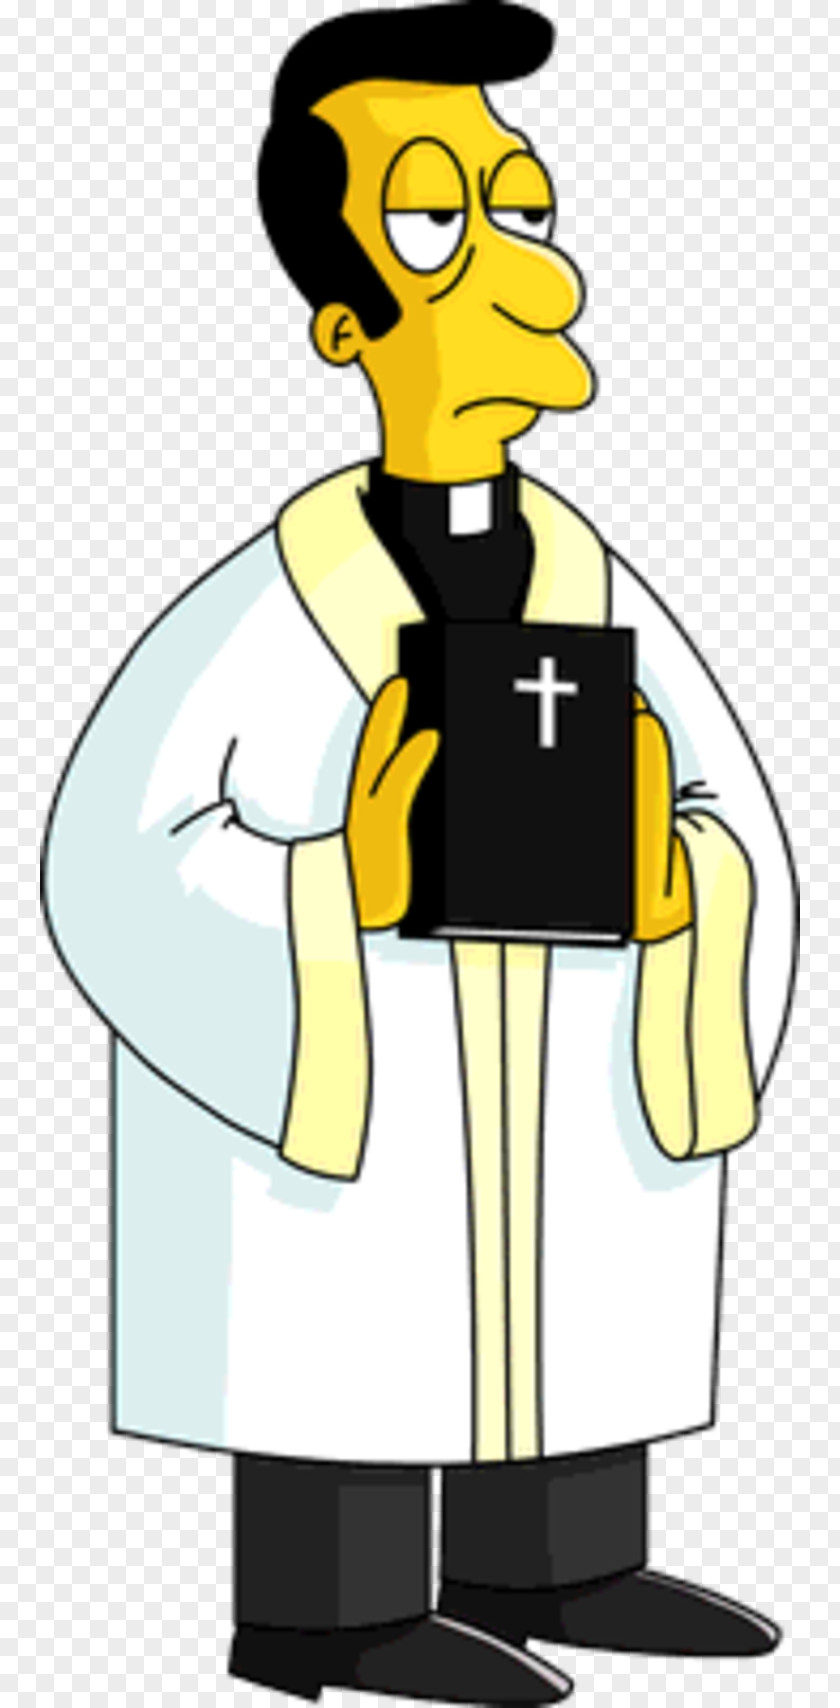 Simpsons Reverend Lovejoy The Simpsons: Tapped Out Ned Flanders Waylon Smithers Moe Szyslak PNG